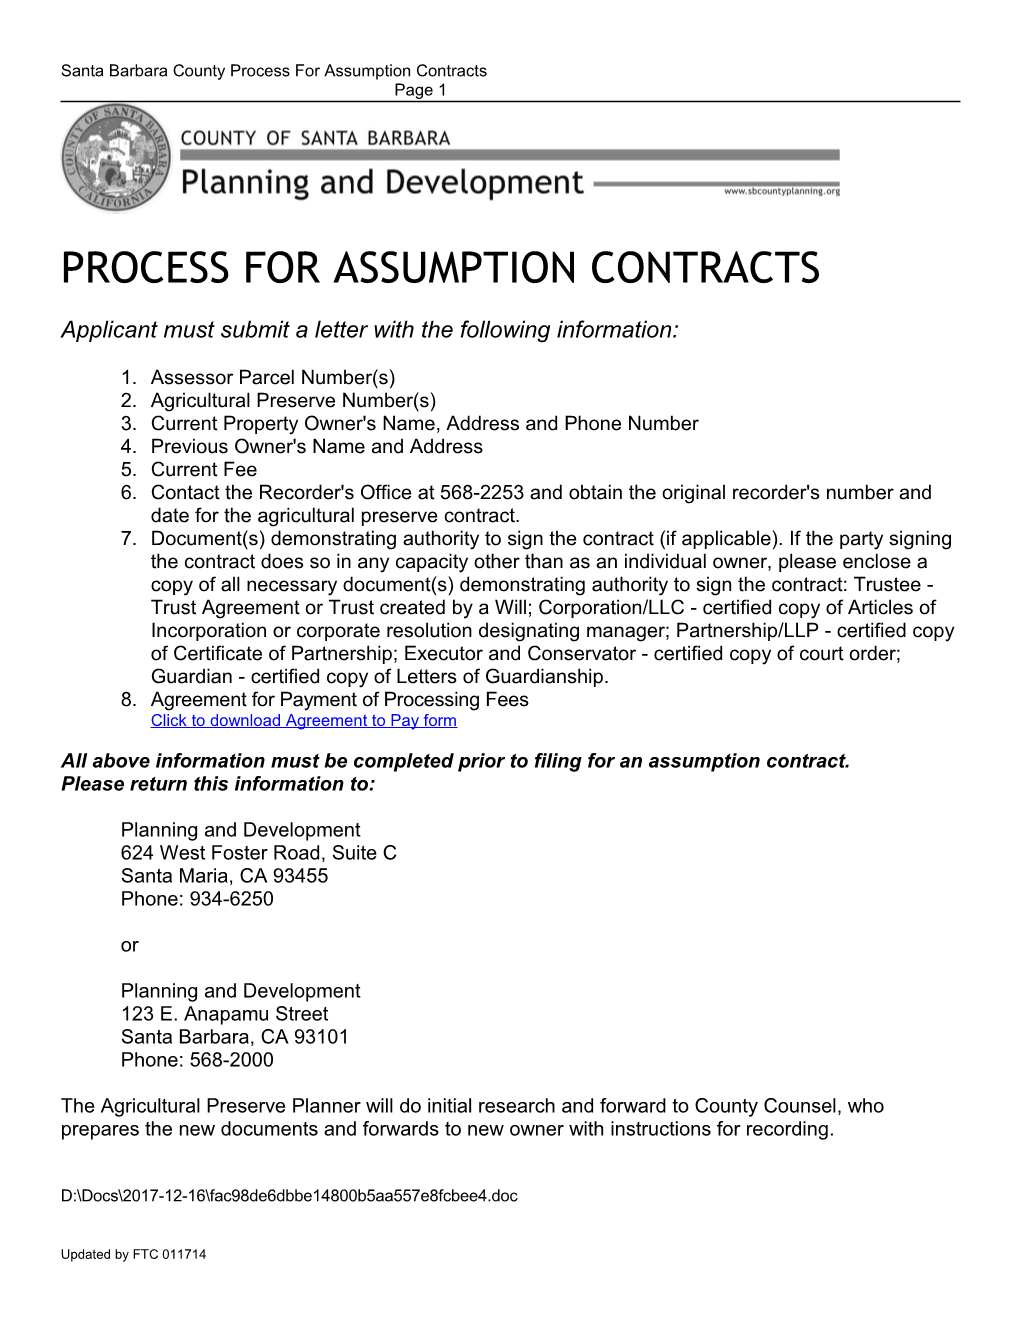 Assumption Contract Form & Requirements